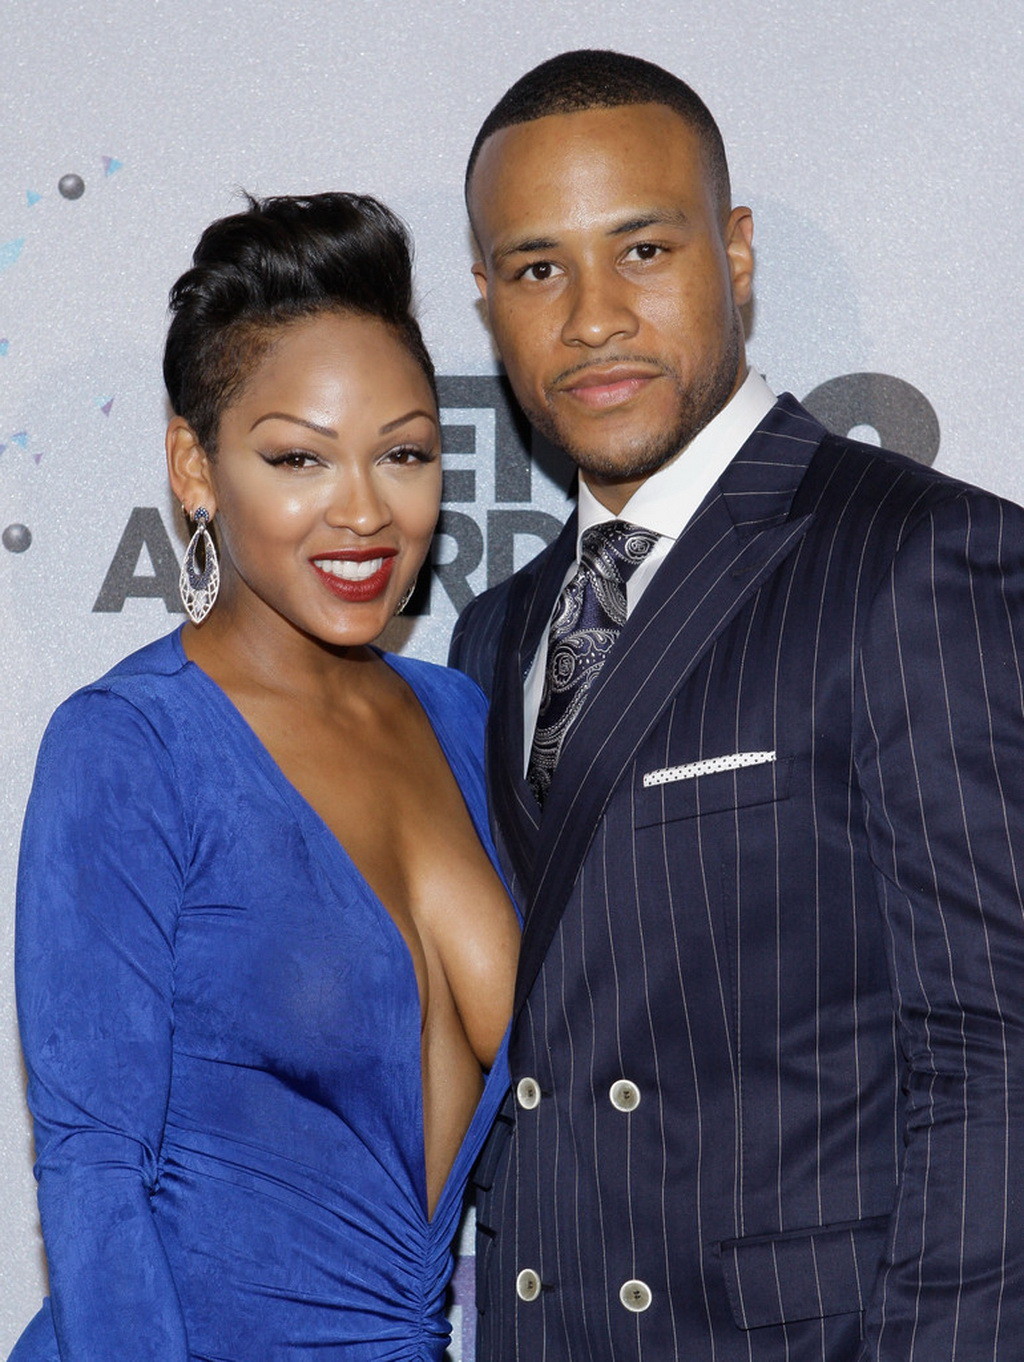 Meagan Good braless shows pokies wearing a skimpy blue dress at the 13th Annual  #75226525